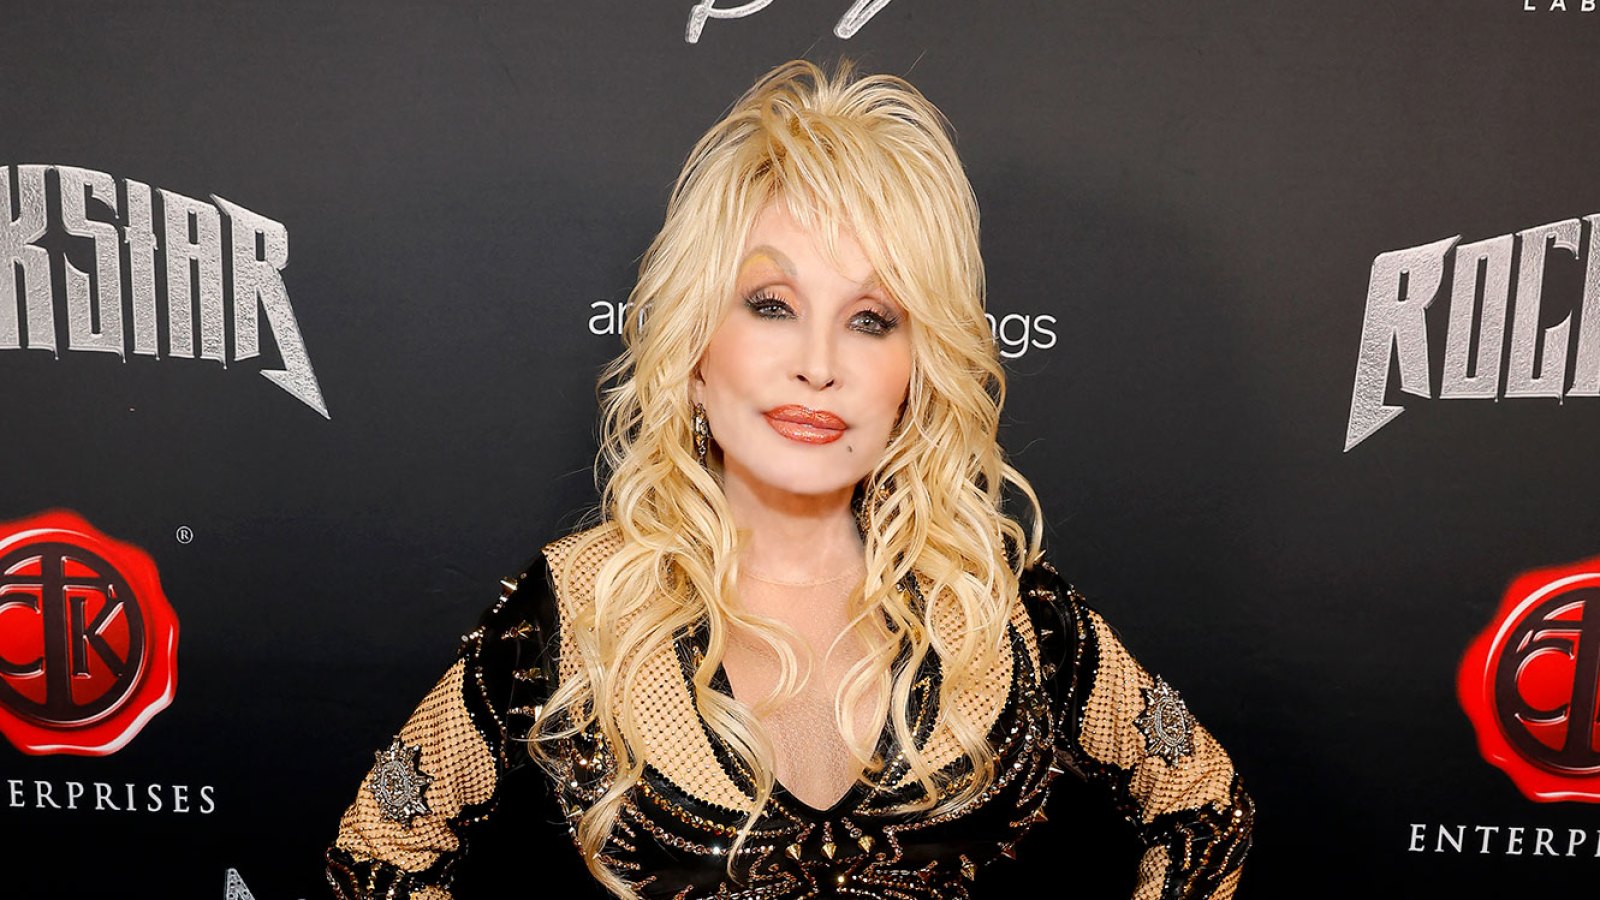 Dolly Parton Reveals What She Told Elle King After Drunk Opry Show